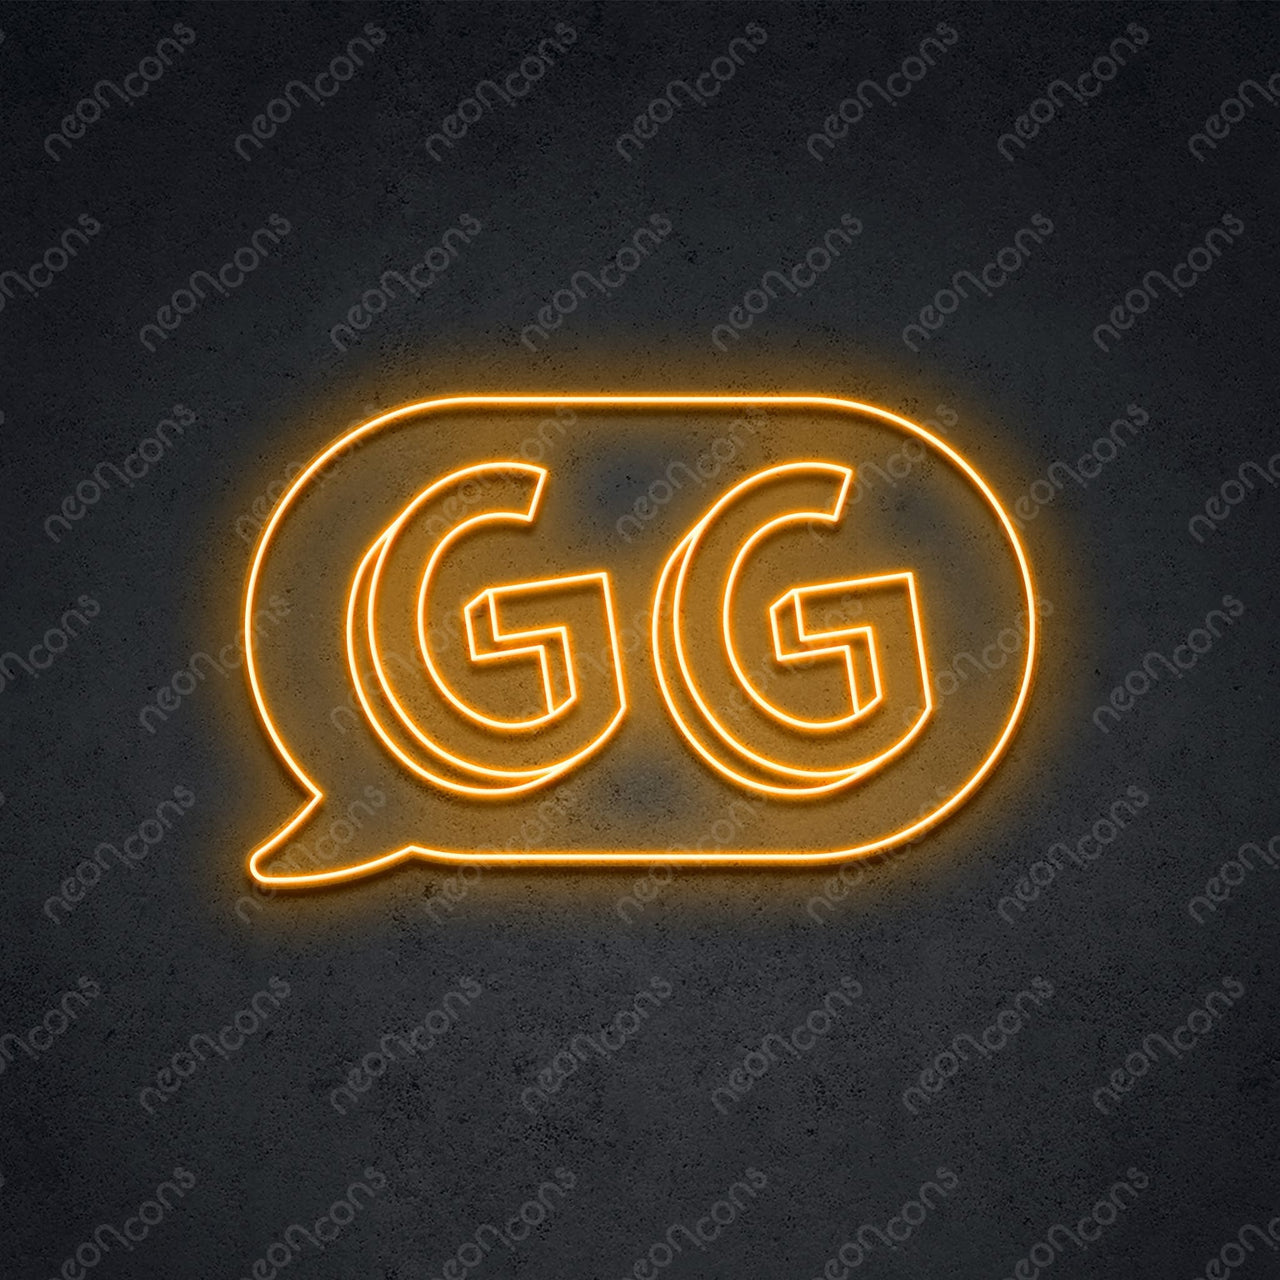 'GG In The Chat' Neon Sign 45cm (1.5ft) / Orange / LED by Neon Icons